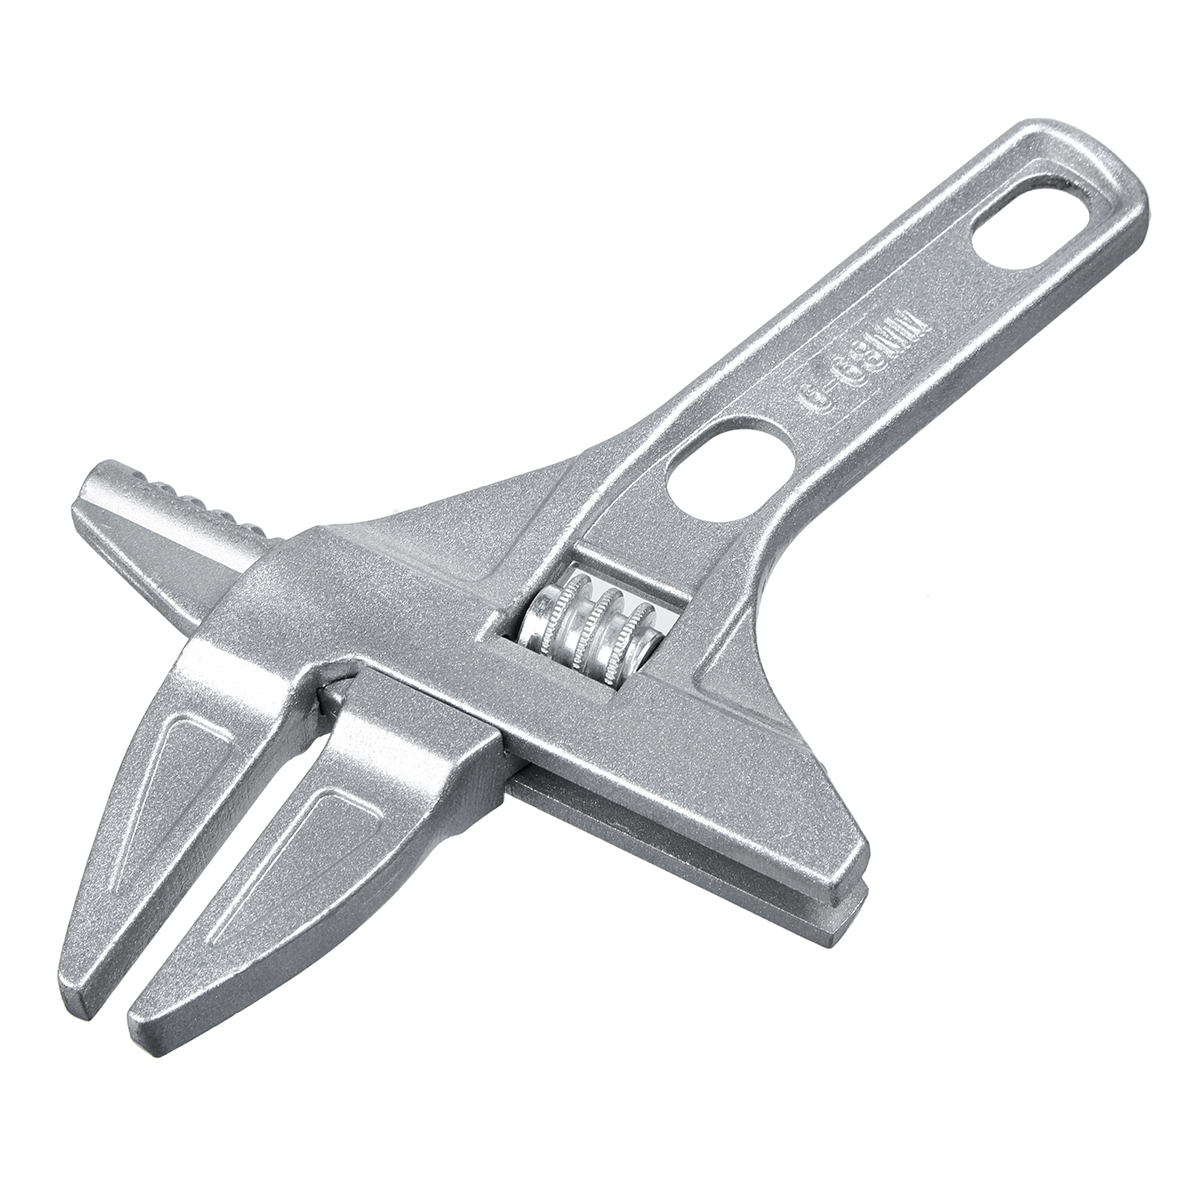 Adjustable-Spanner-16-68mm-Big-Opening-Spanner-Wrench-Mini-Nut-Key-Hand-Tools-Metal-Universal-Spanne-1625089-5